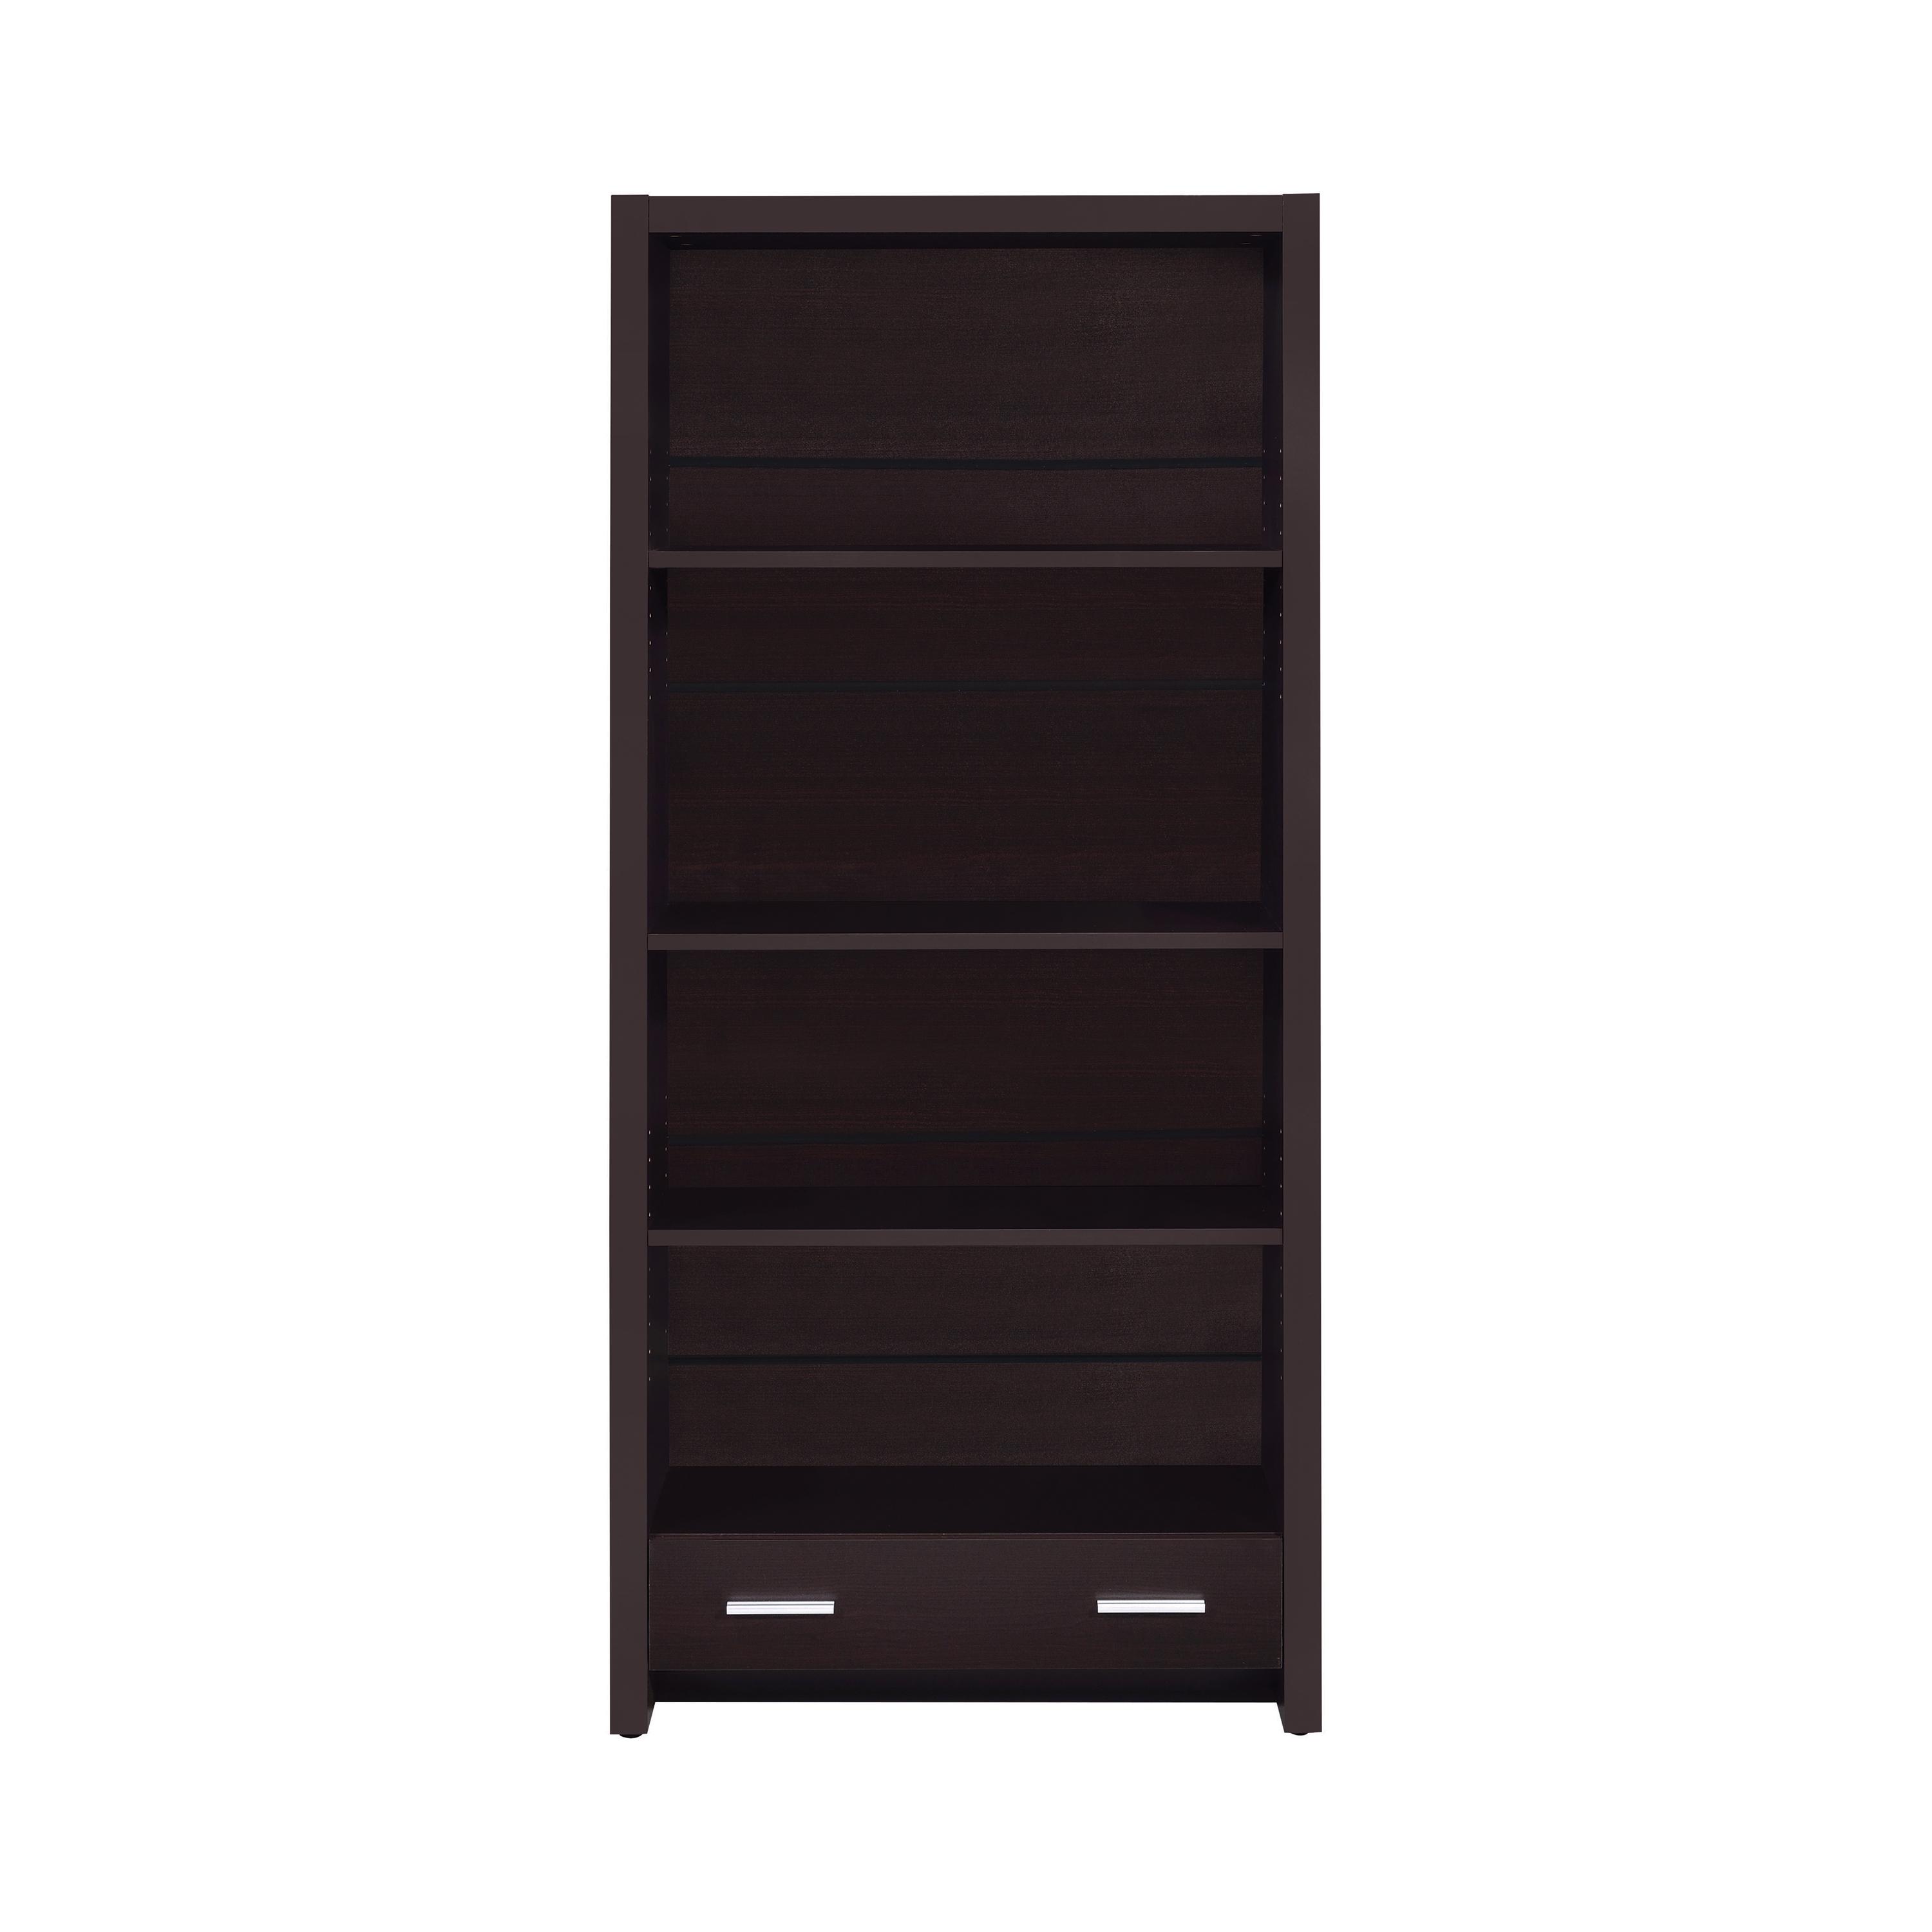 Transitional Bookcase 800905 Skylar 800905 in Cappuccino 